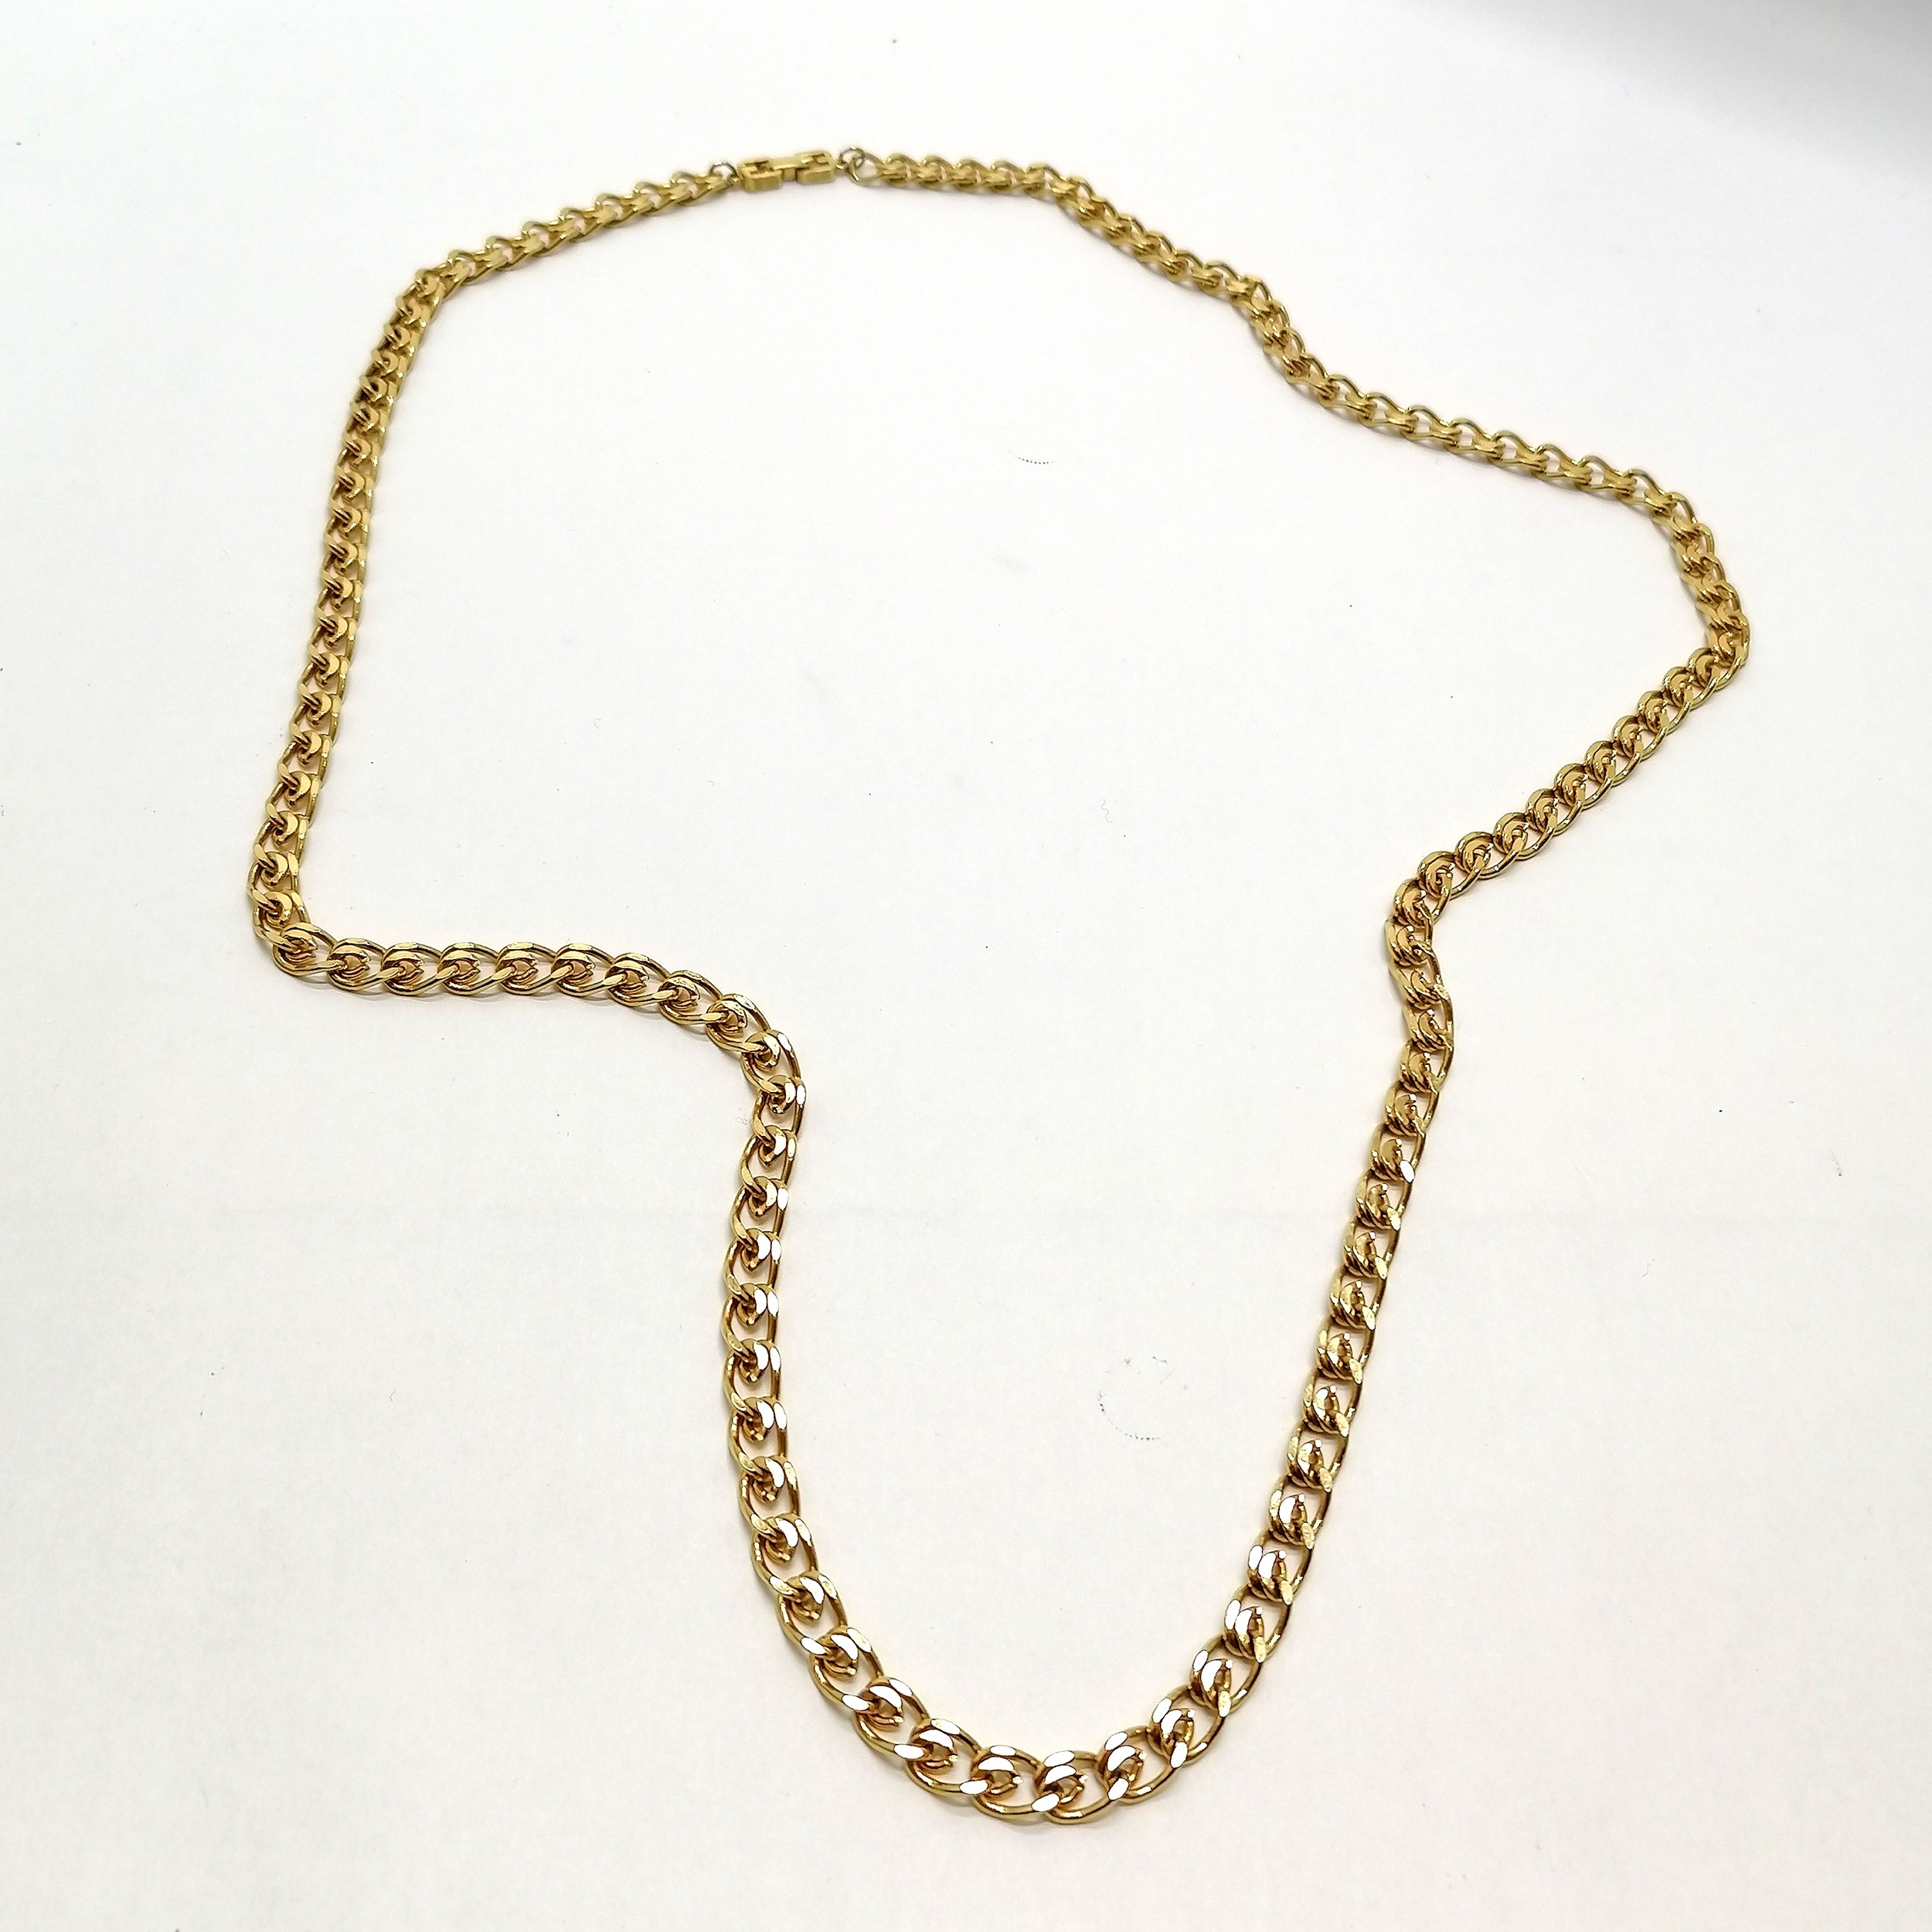 Givenchy Paris & New York long gold tone necklace - 90cm - SOLD ON BEHALF OF THE NEW BREAST CANCER